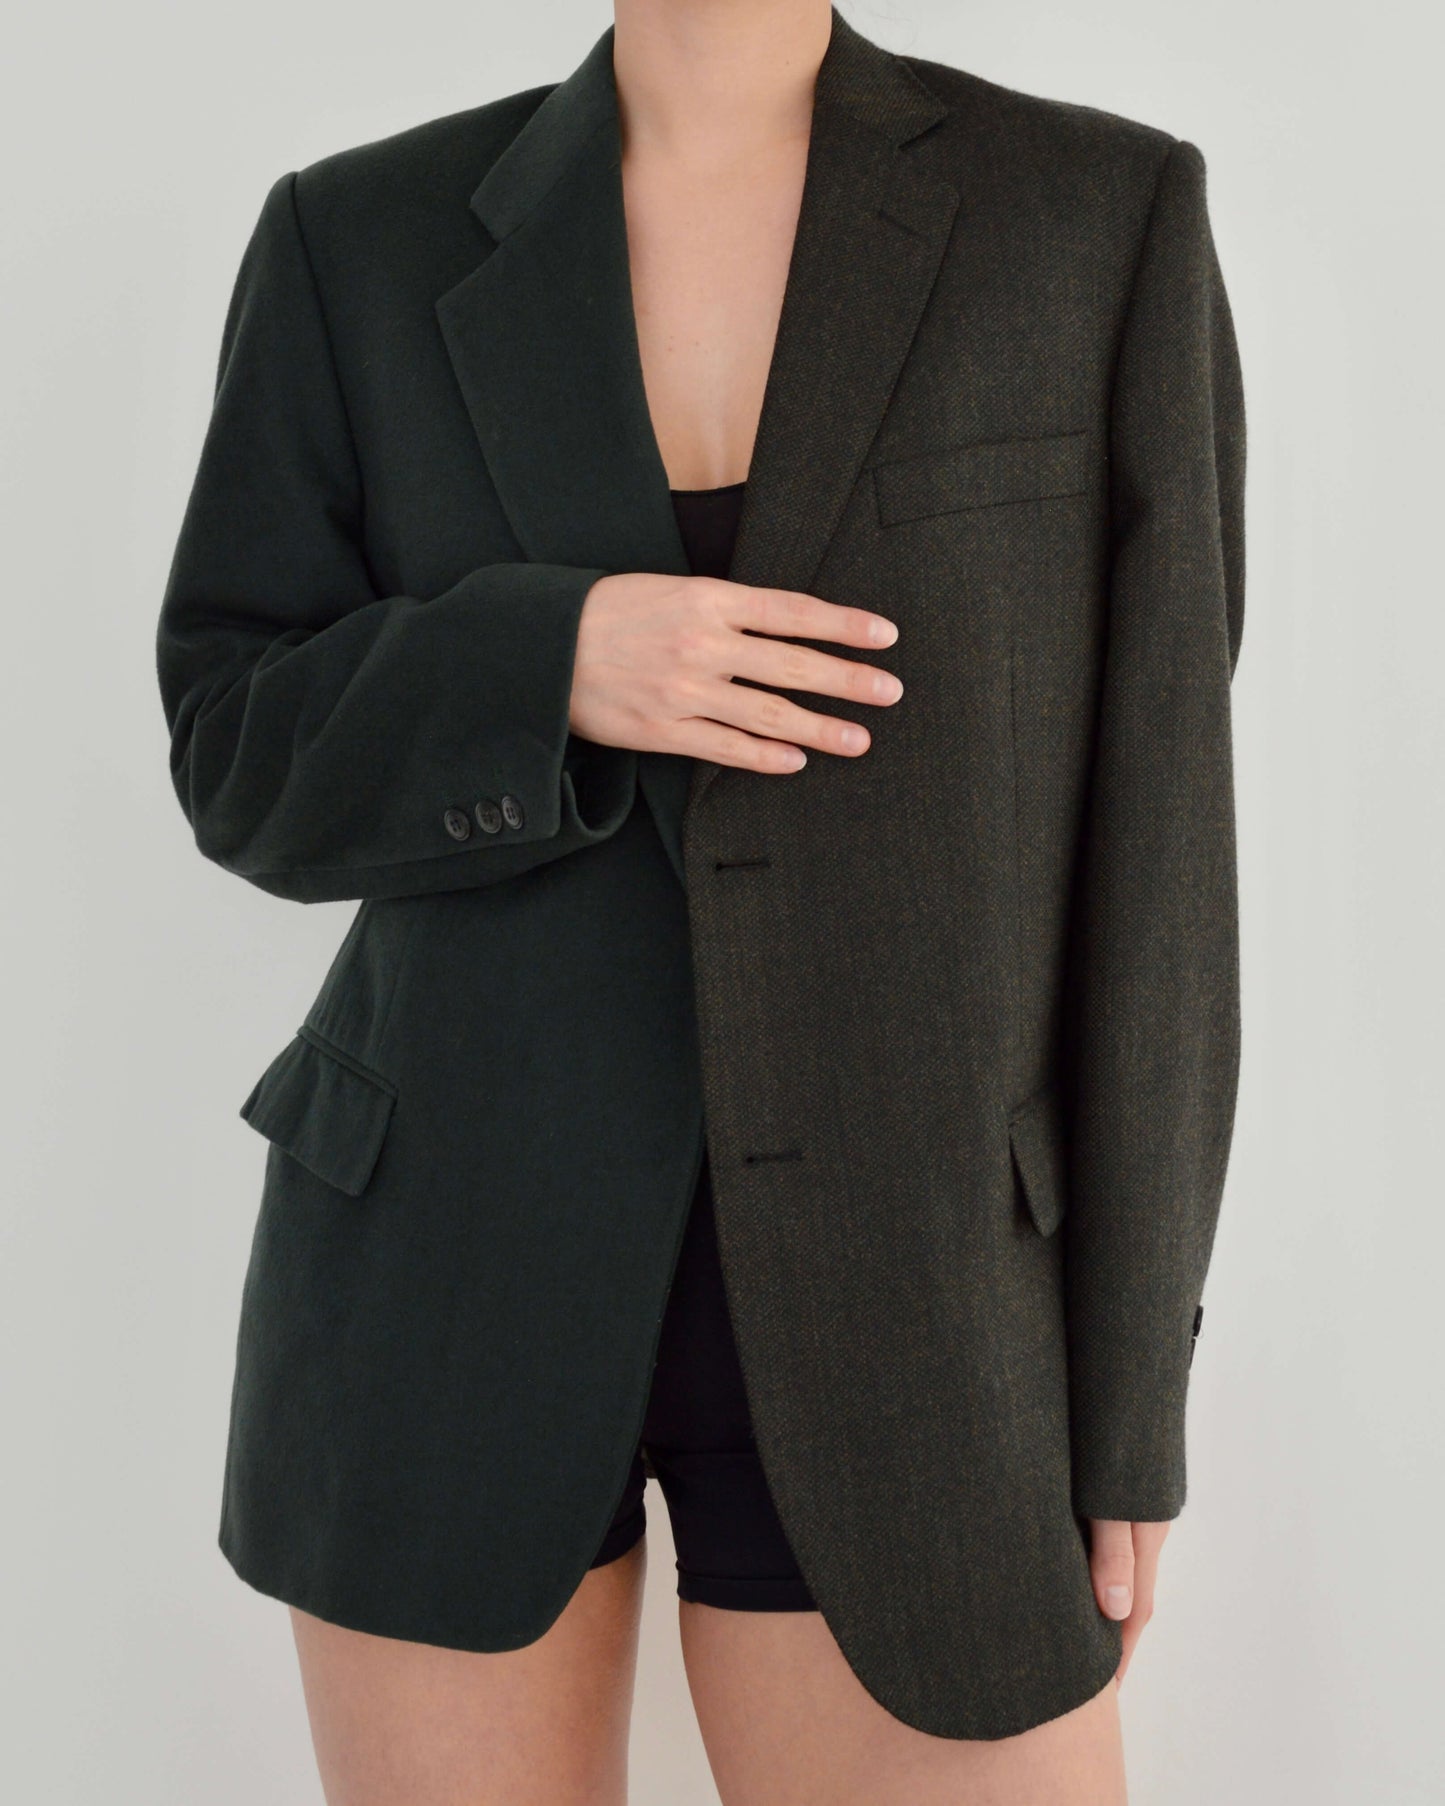 DUO Blazer - Green Two Shades (S/L)